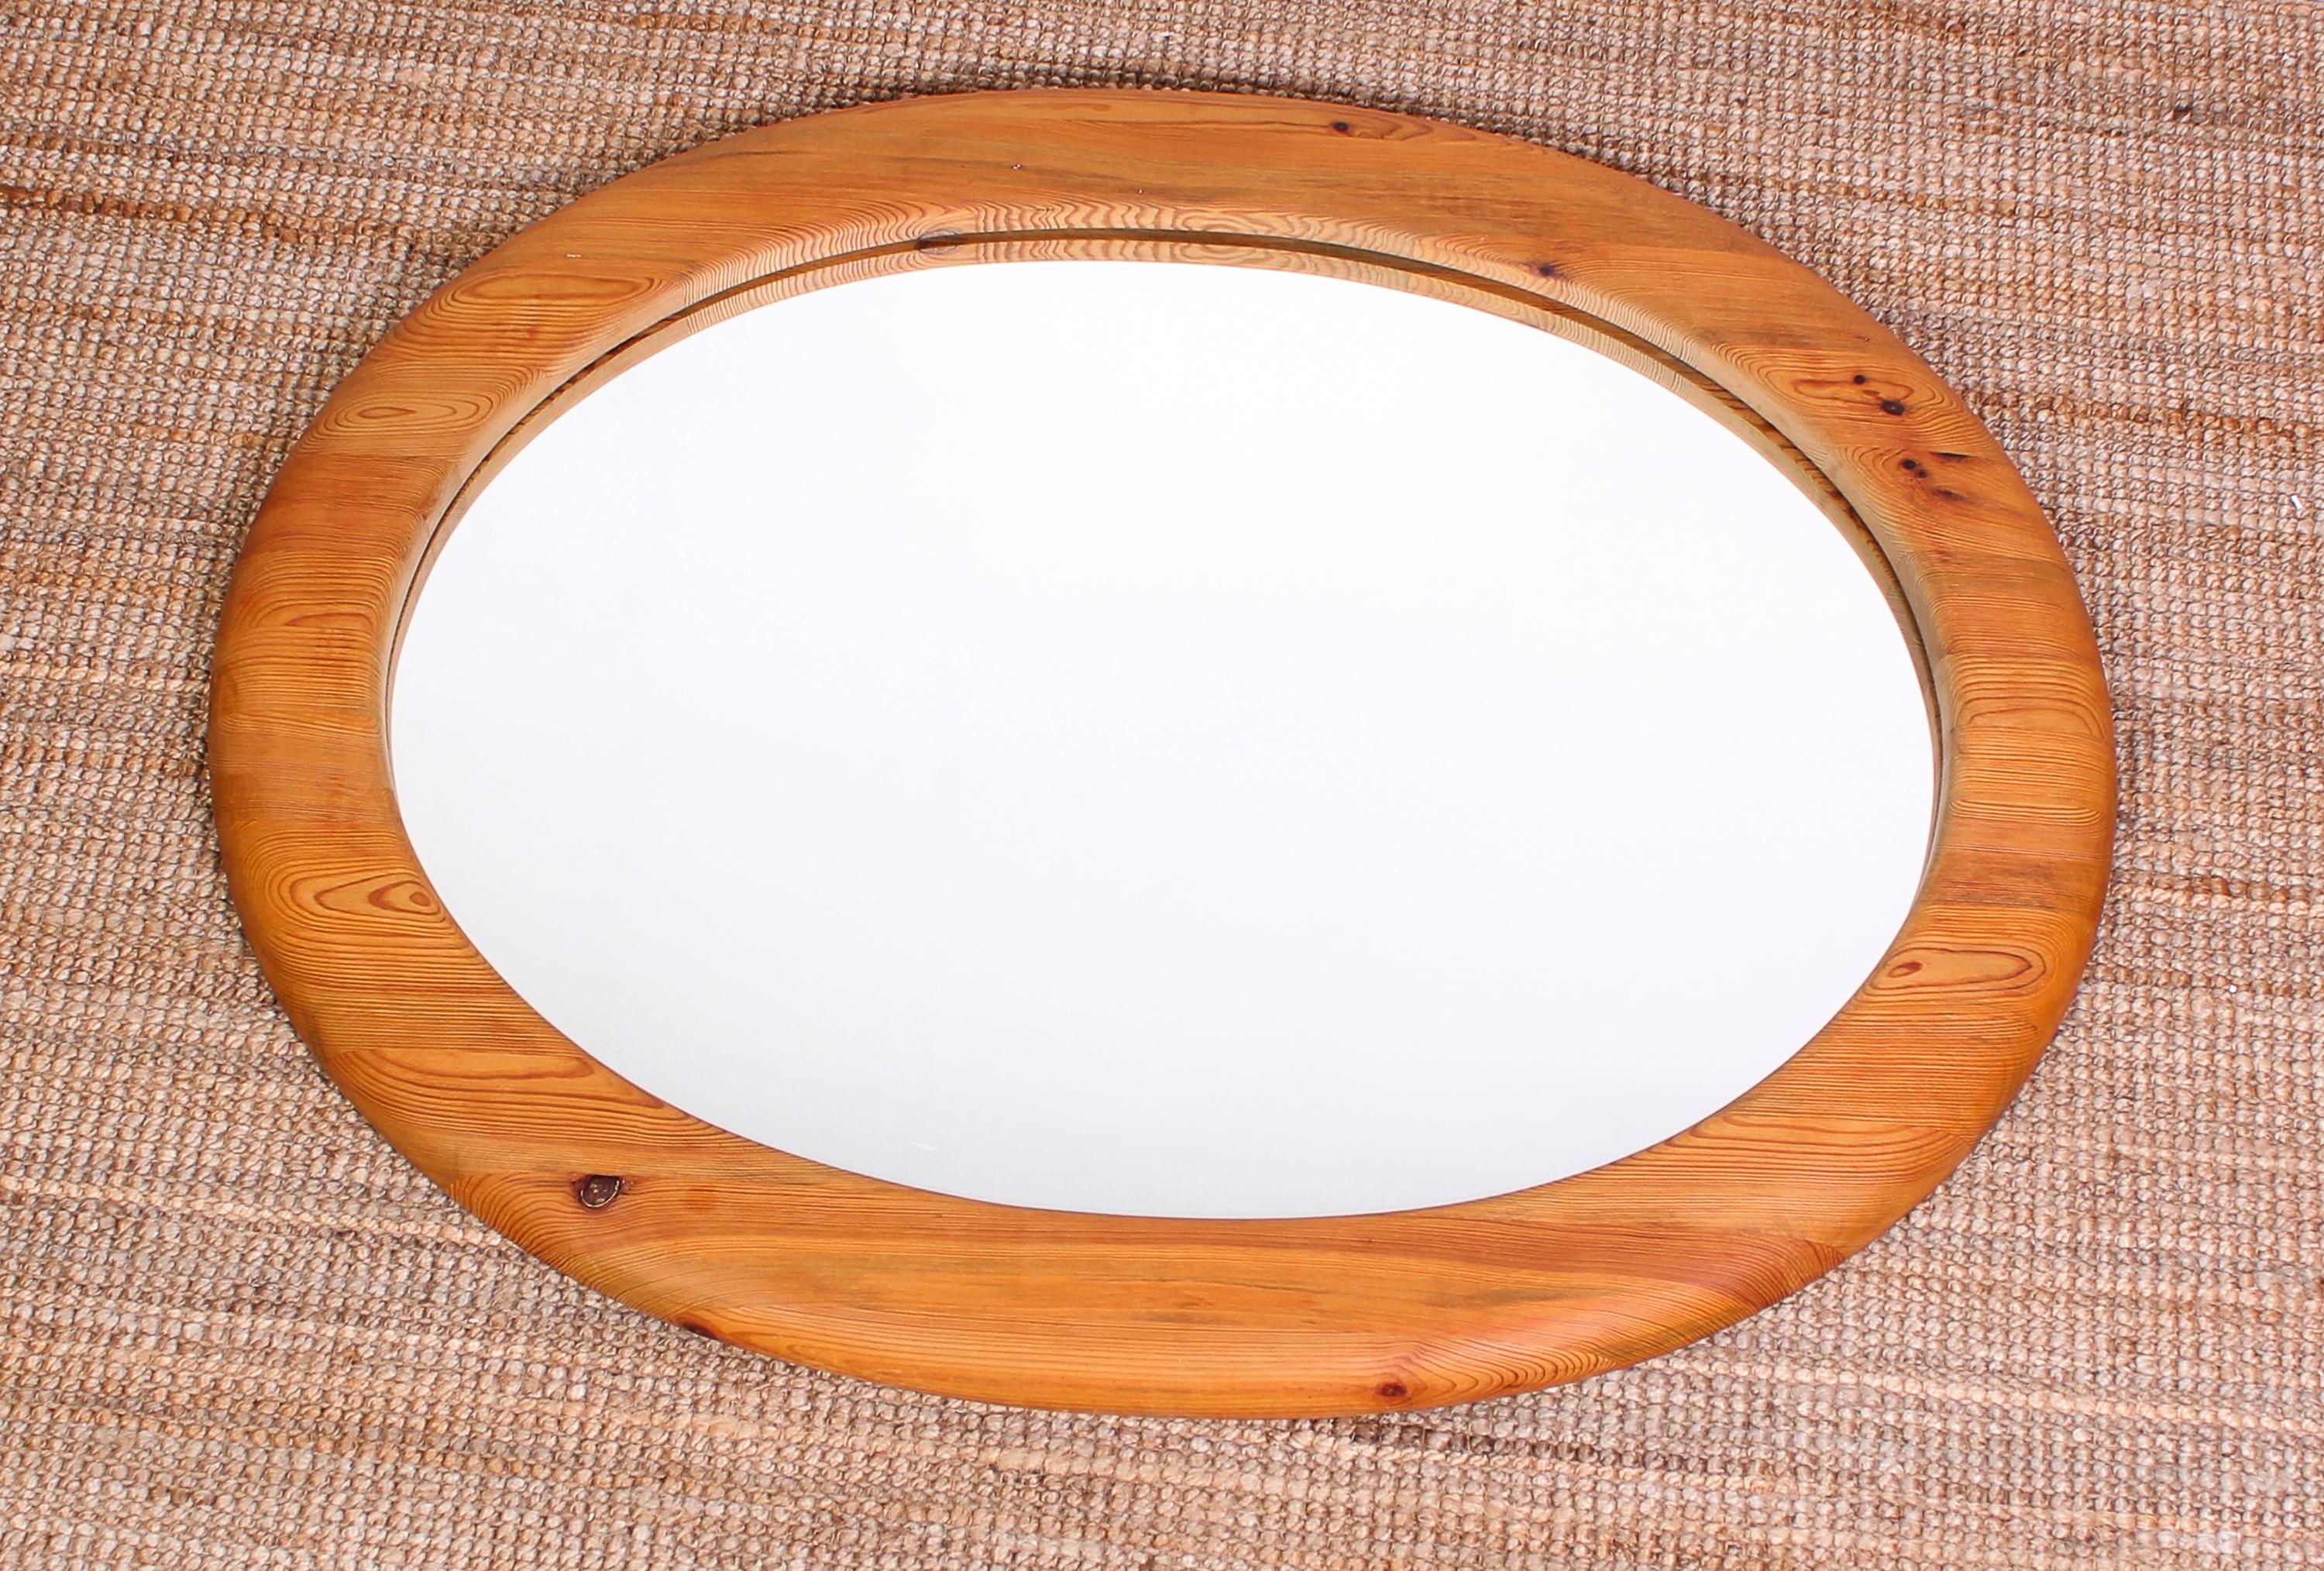 Midcentury Large Oval Solid Pine Mirror, Sweden, 1960s For Sale 3